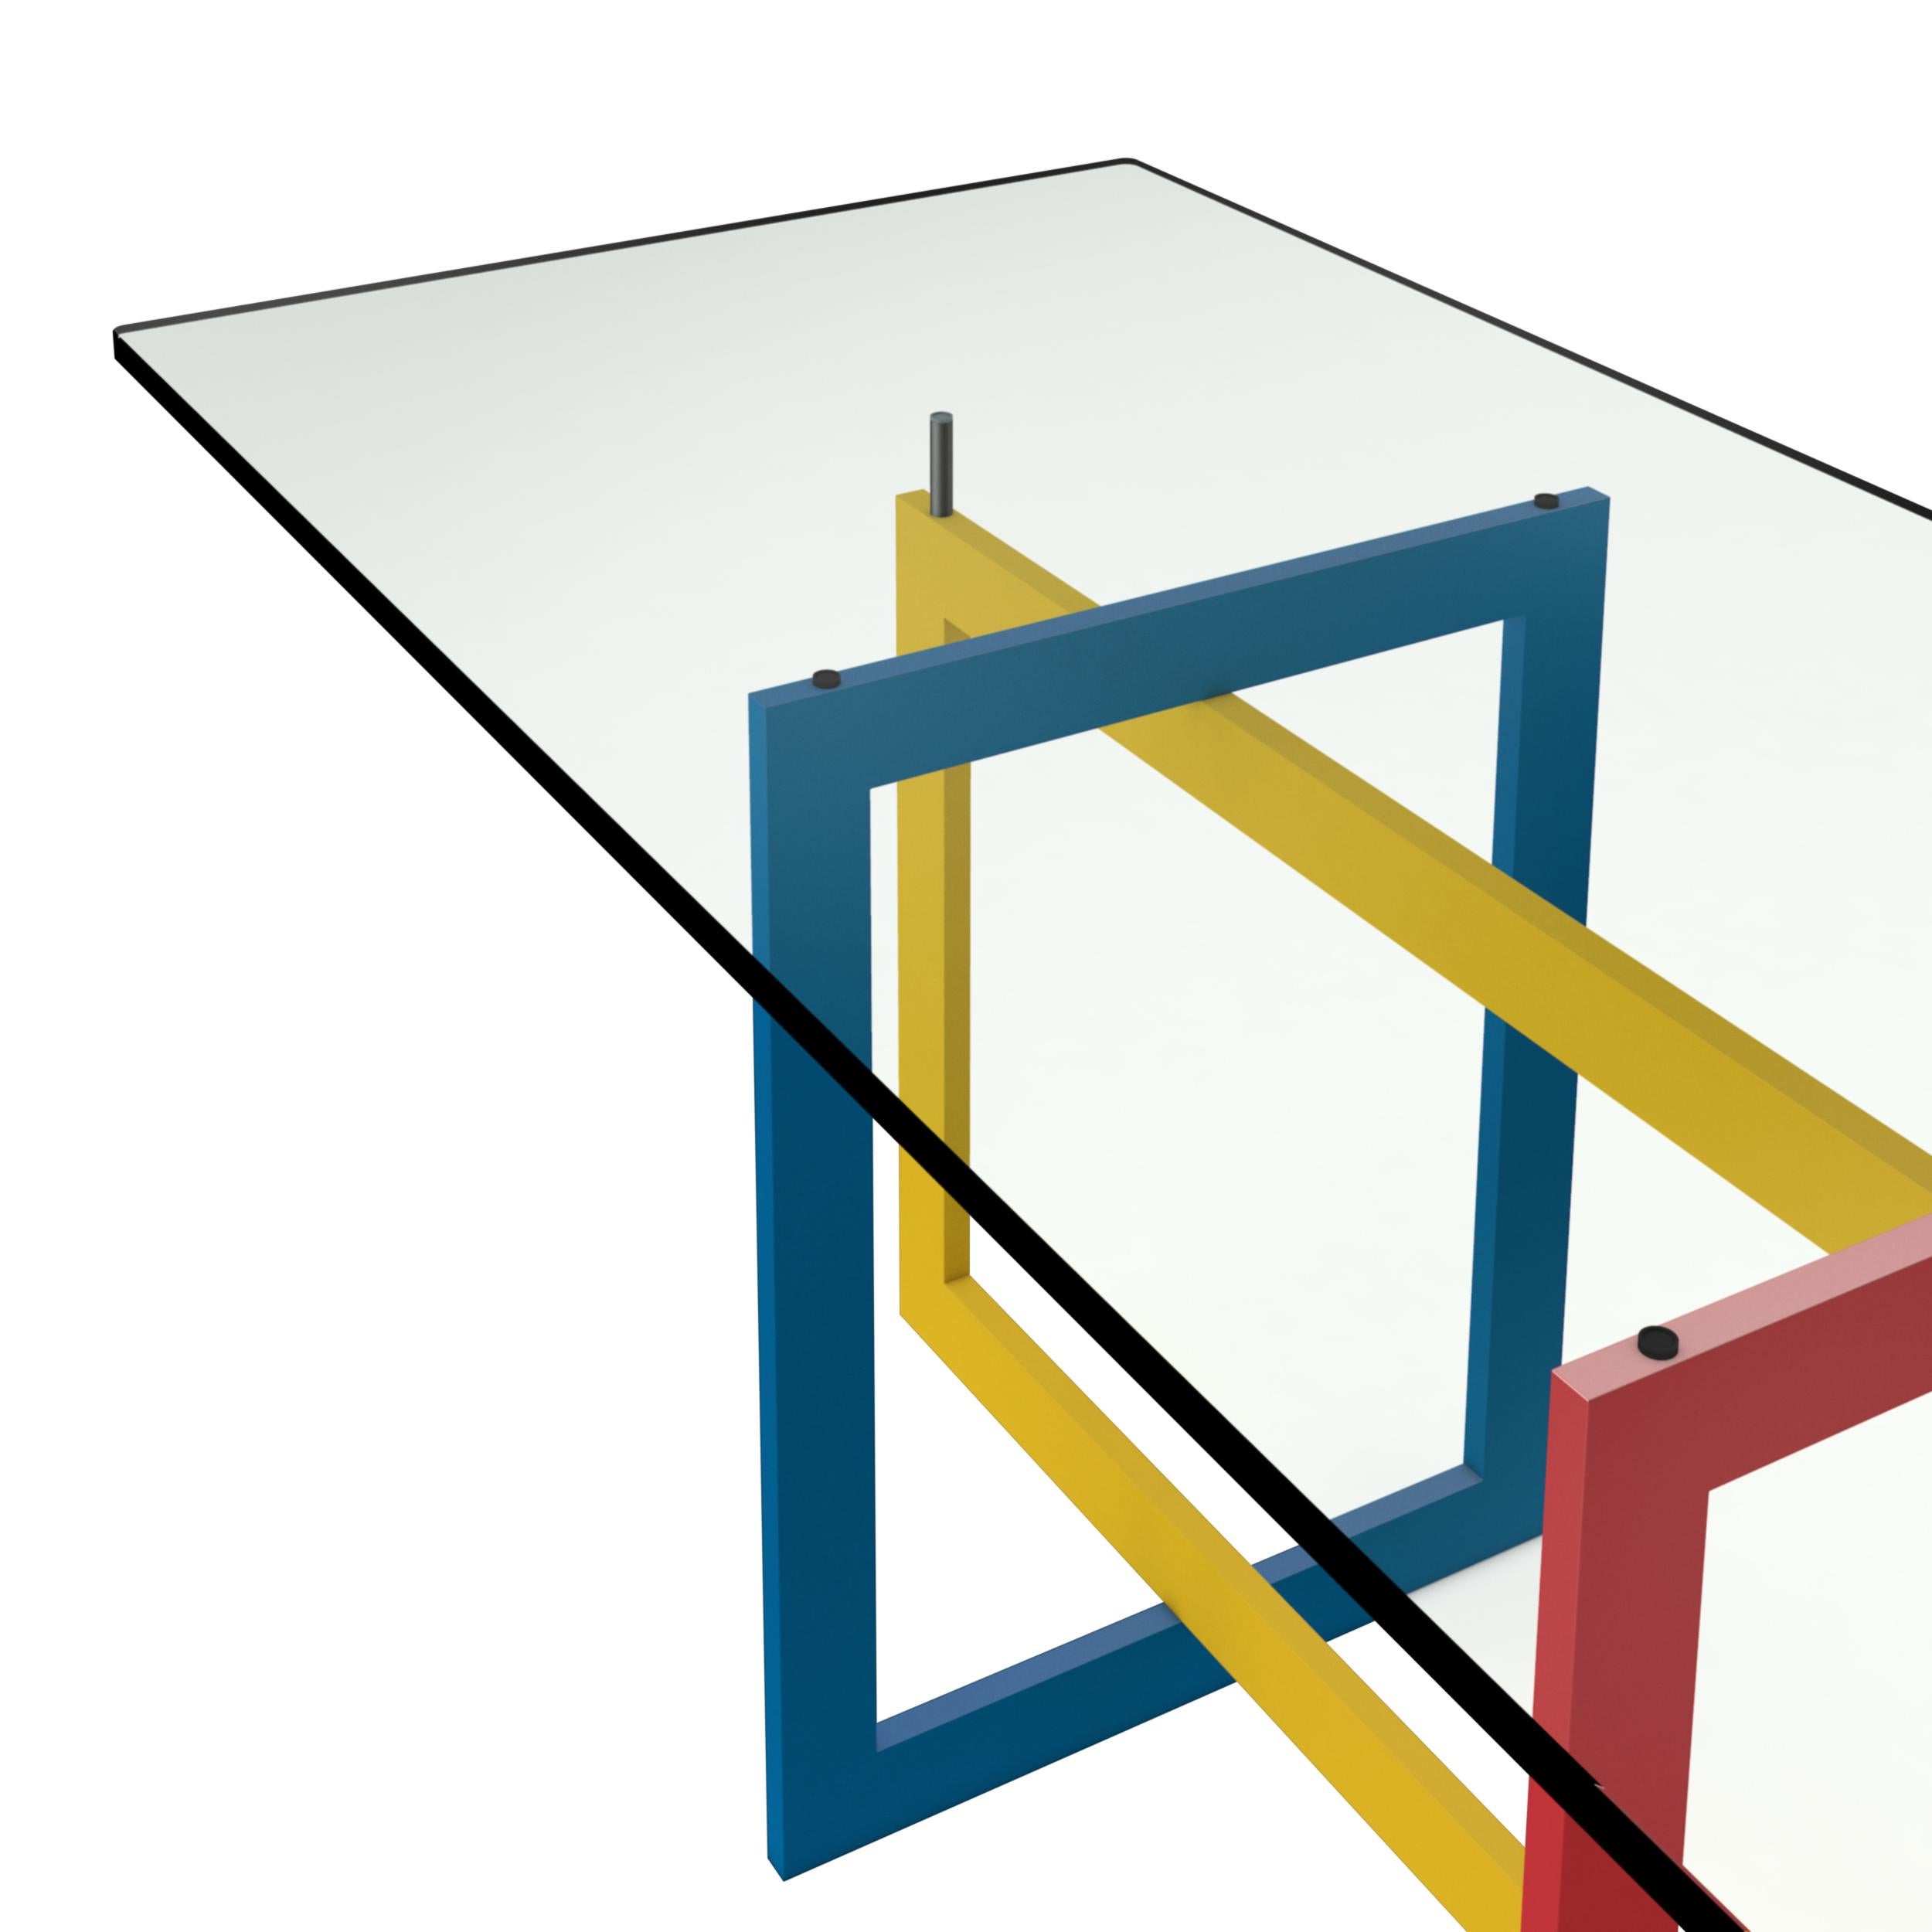 Italian Contemporary Jonathan High Table with Tempered Crystal Top, Mondrian Version For Sale